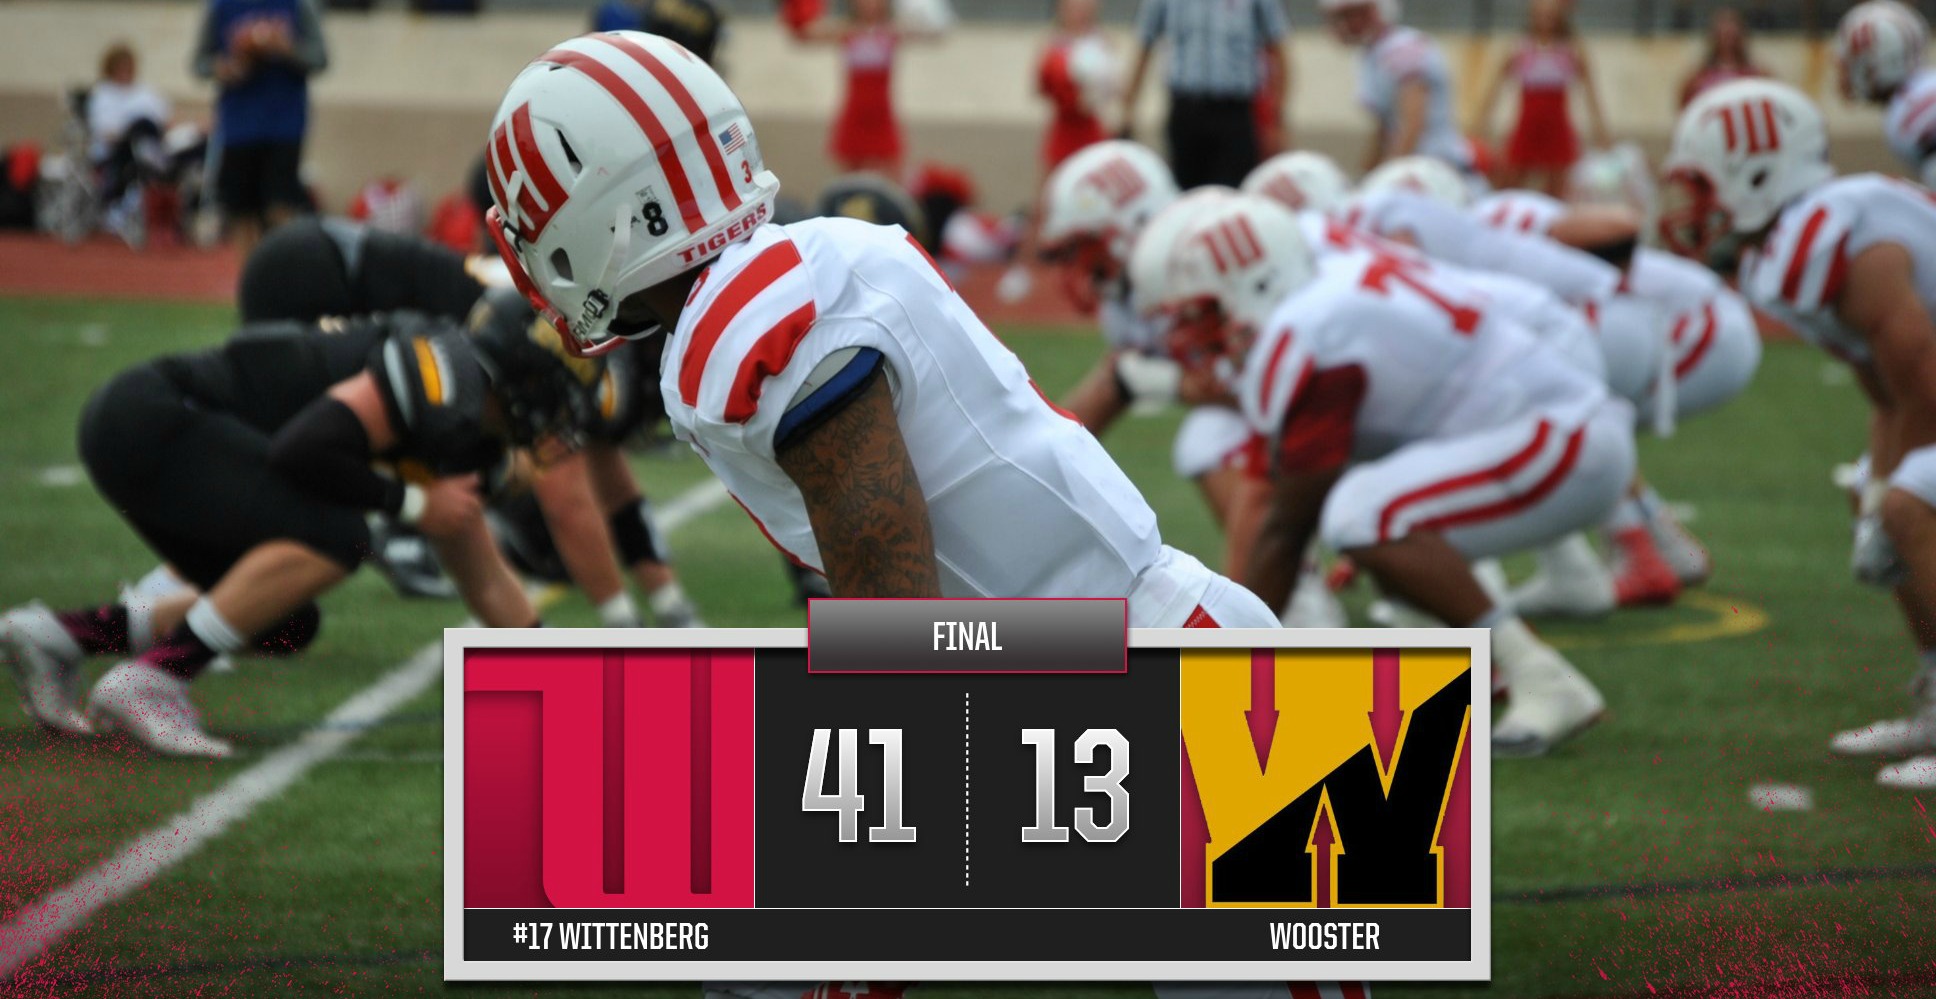 #17 Wittenberg Moves to 4-0 After 41-13 Win Over Wooster